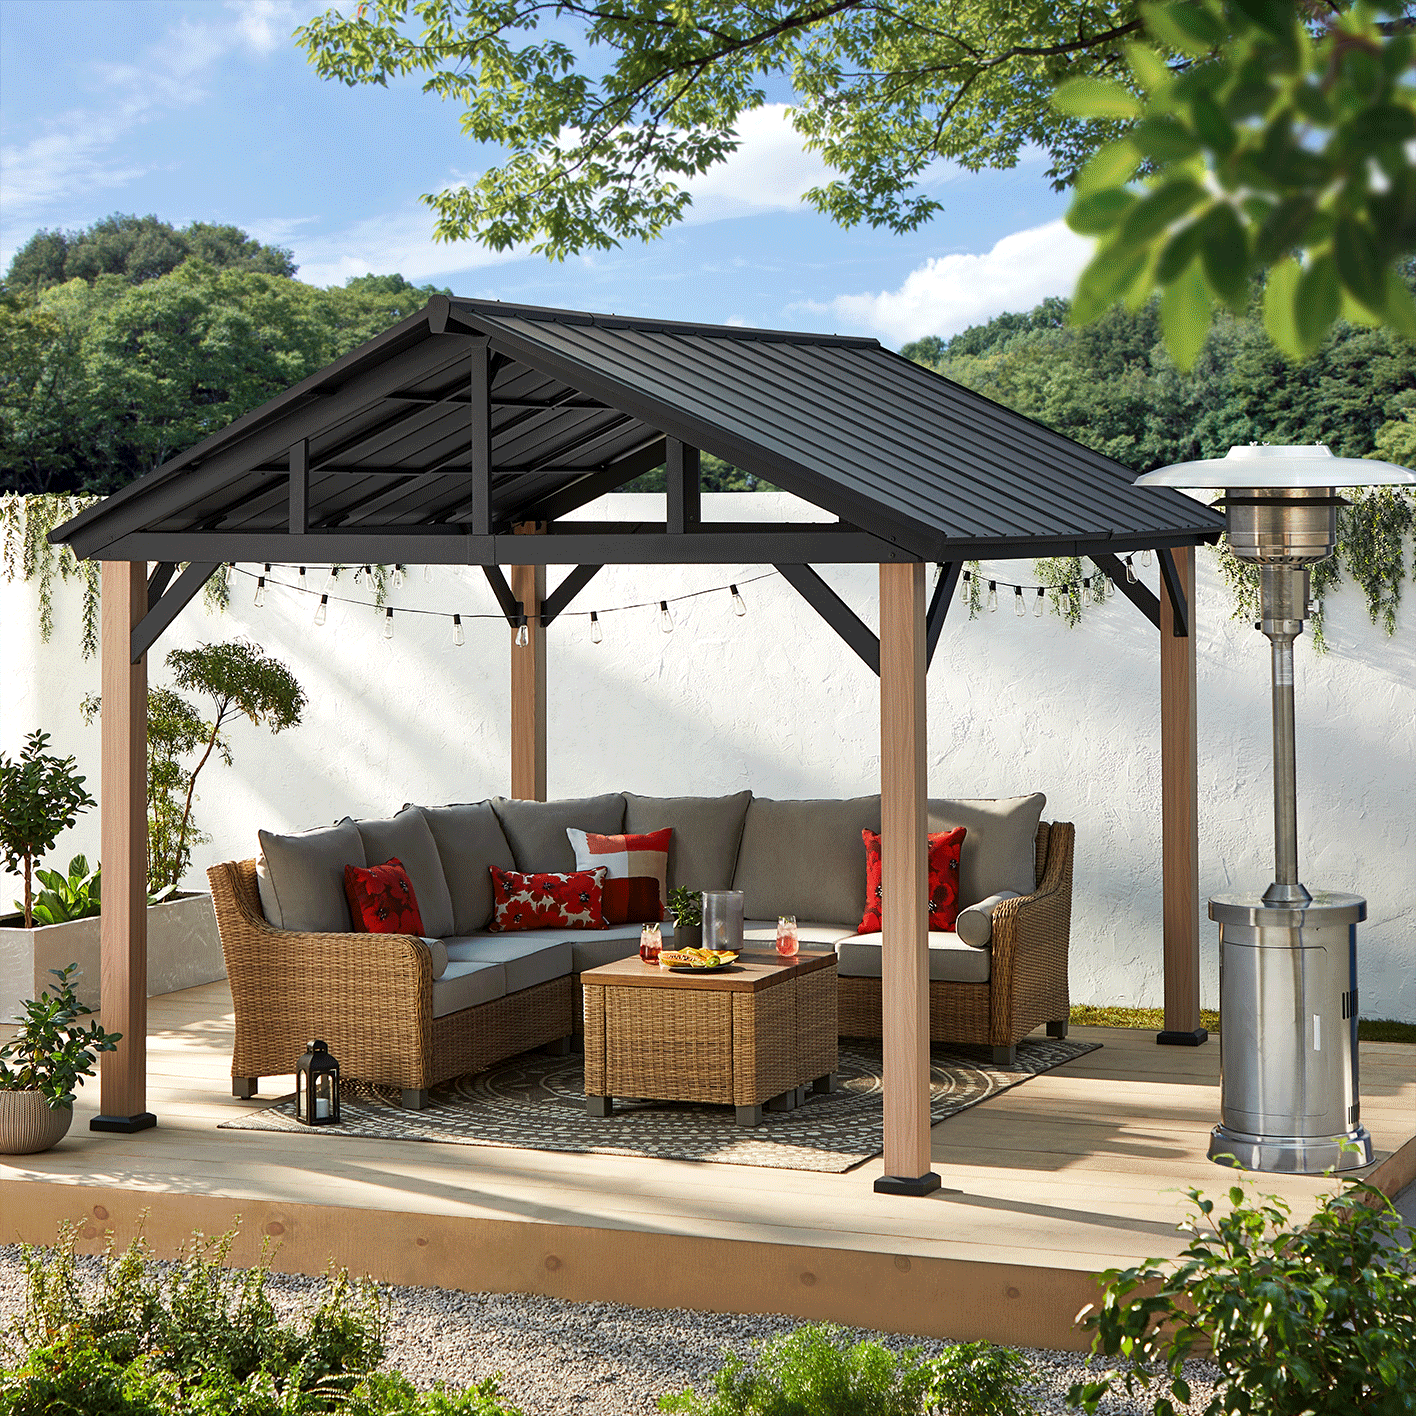 A CANVAS Homestead Hard Top Gazebo with a CANVAS Moraine sectional set under it.